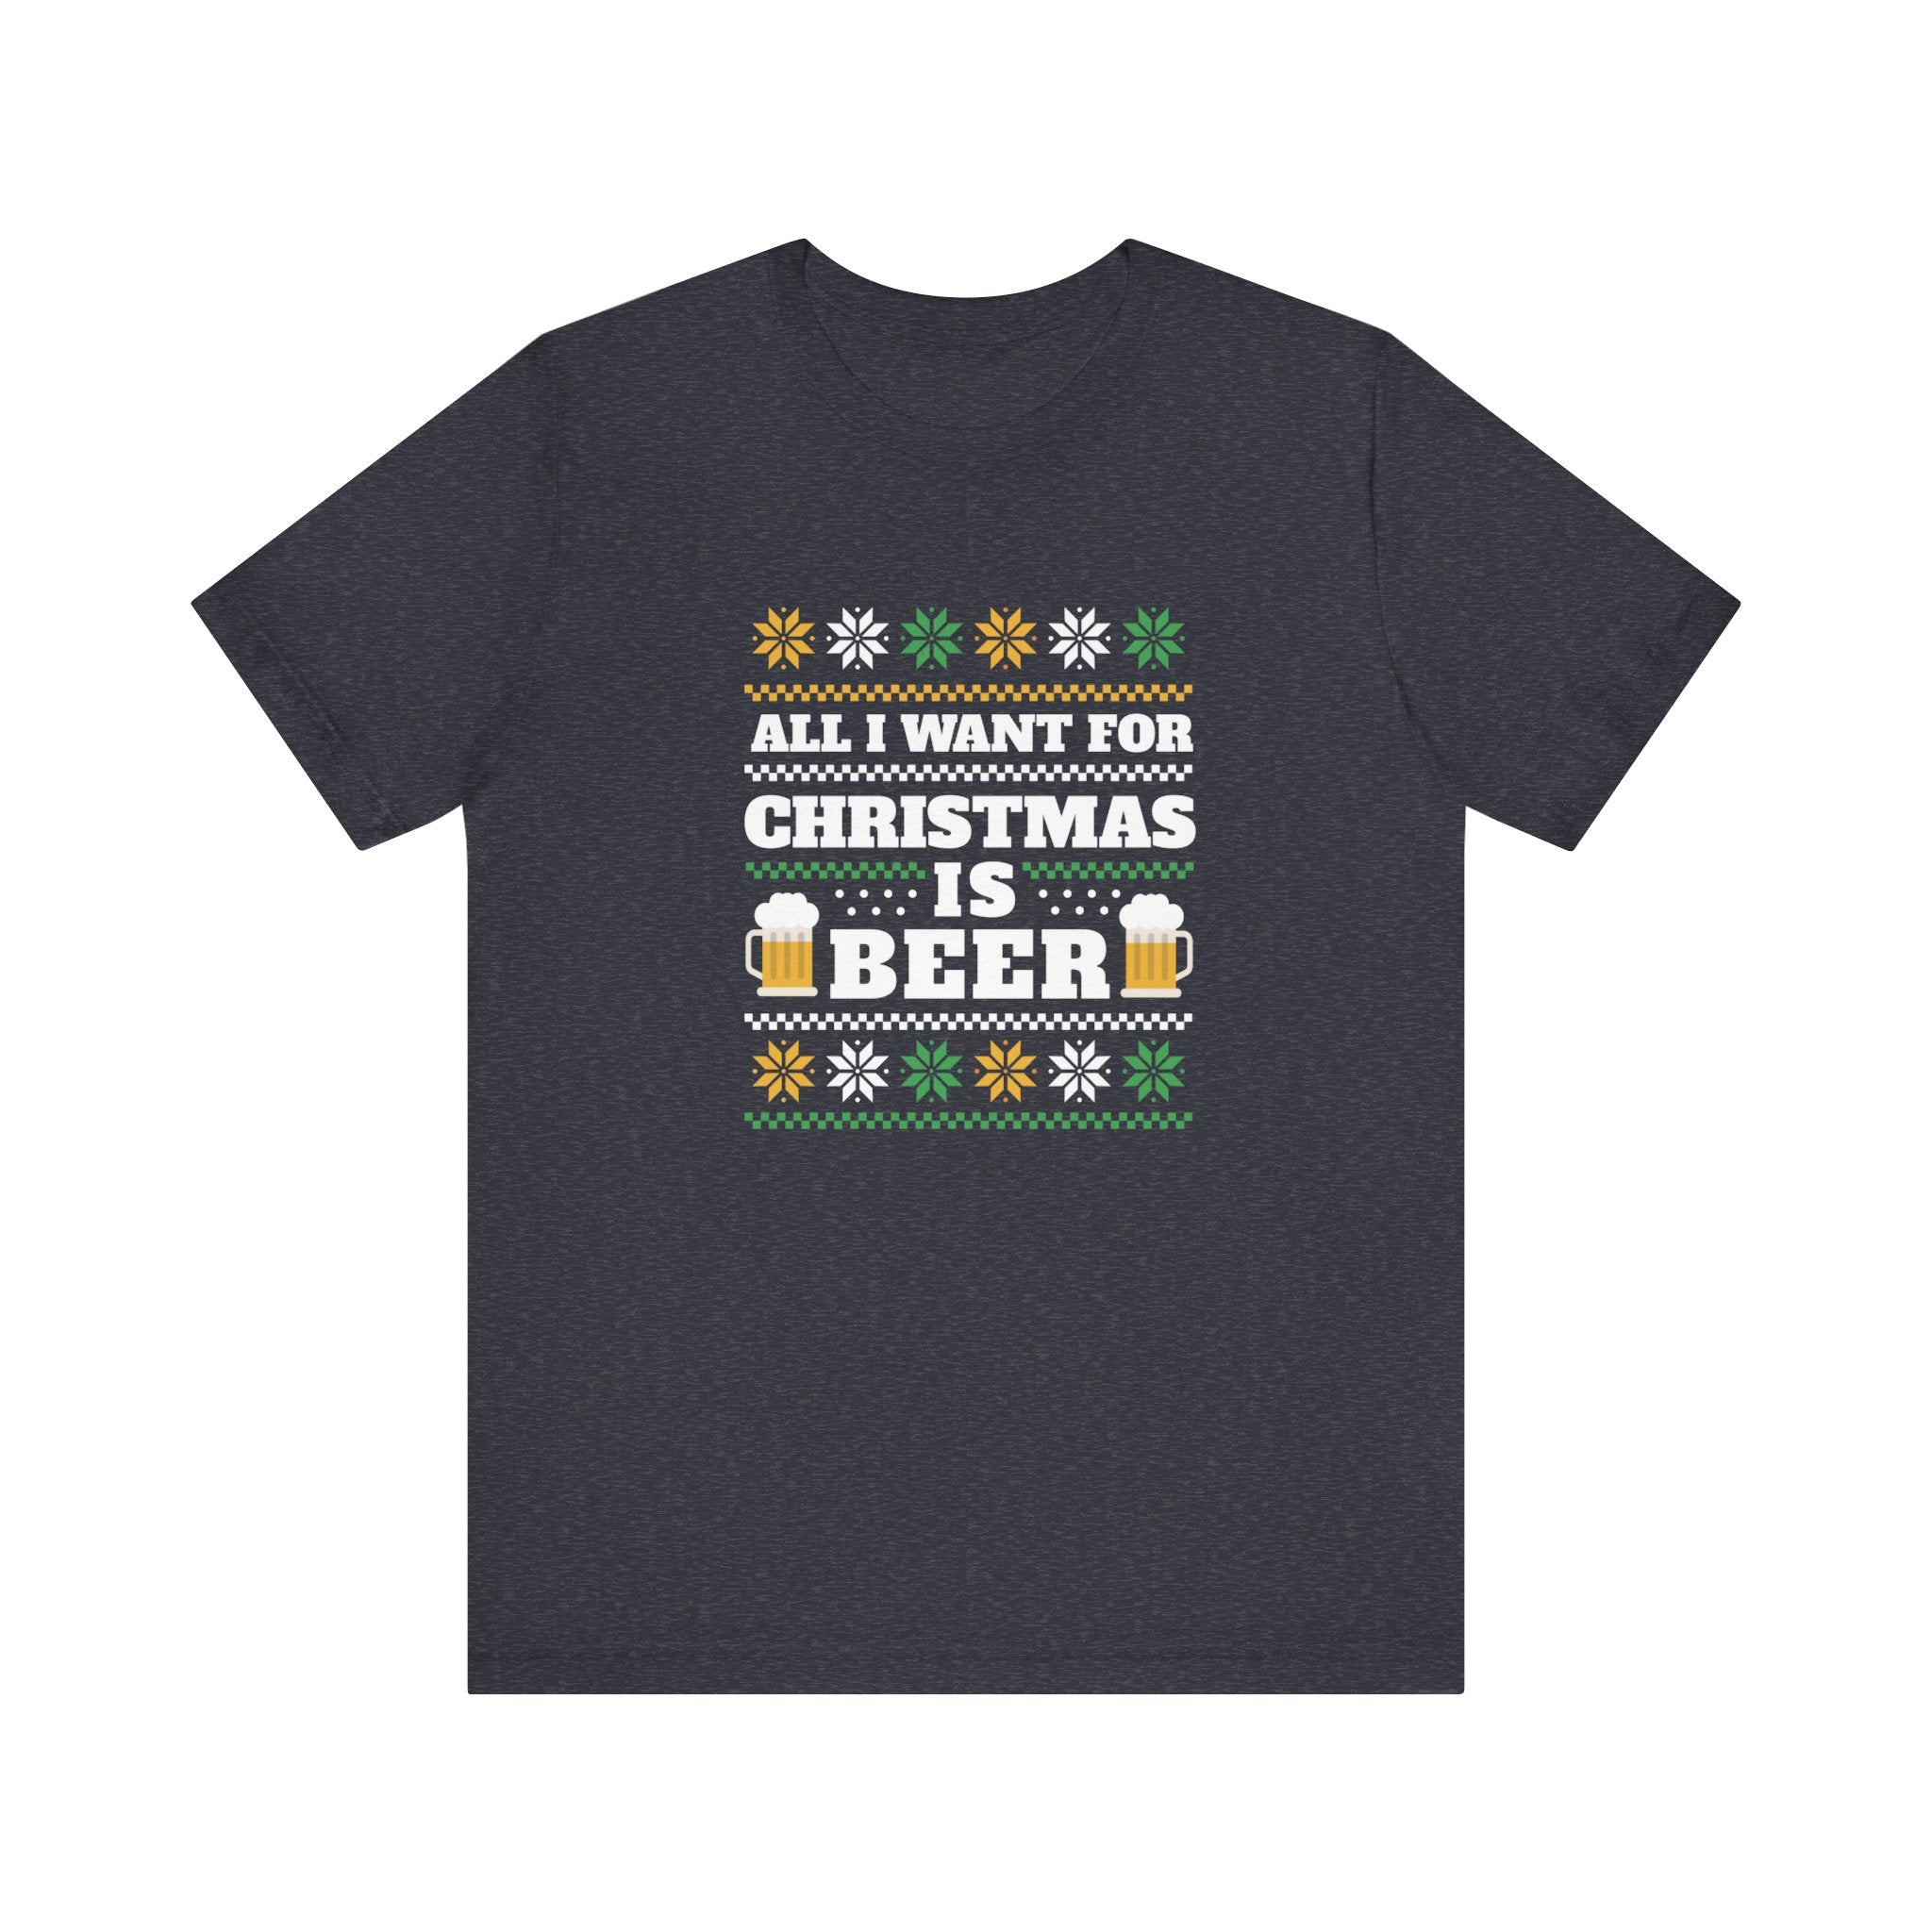 Beer Ugly Sweater - T-Shirt: Black Airlume cotton T-shirt with text "All I Want For Christmas Is Beer" in white, yellow, and green, alongside graphic images of beer mugs and festive Ugly Sweater patterns.